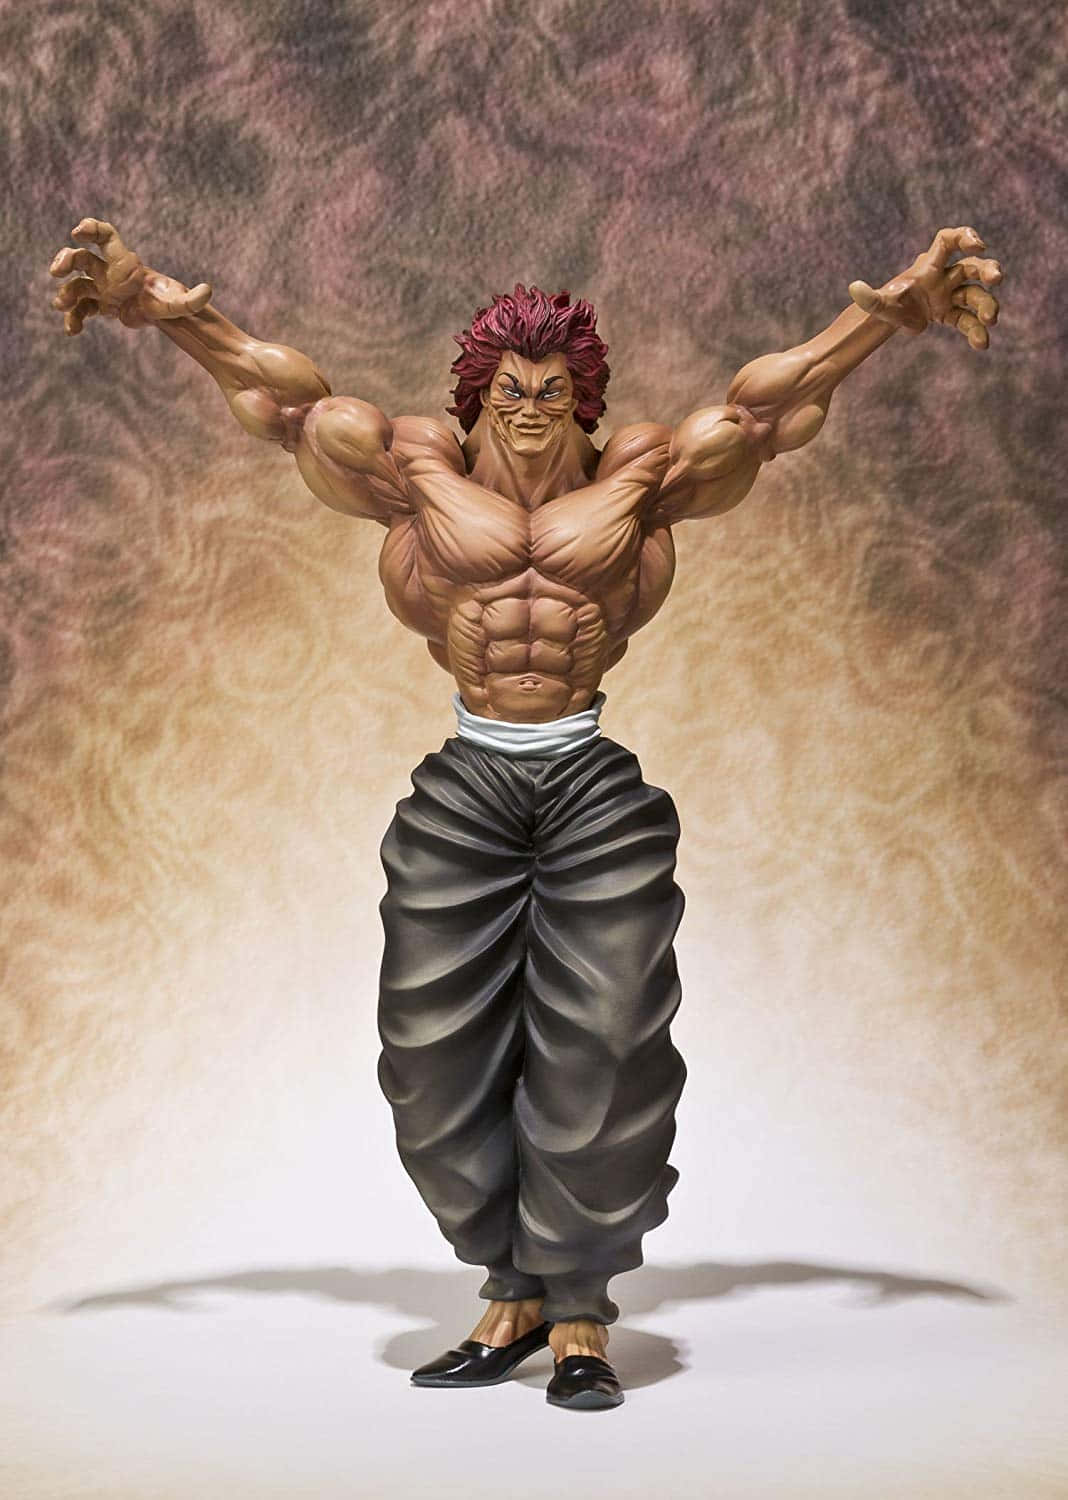 Yujiro Hanma by me Click on the image to see better quality : r/Grapplerbaki